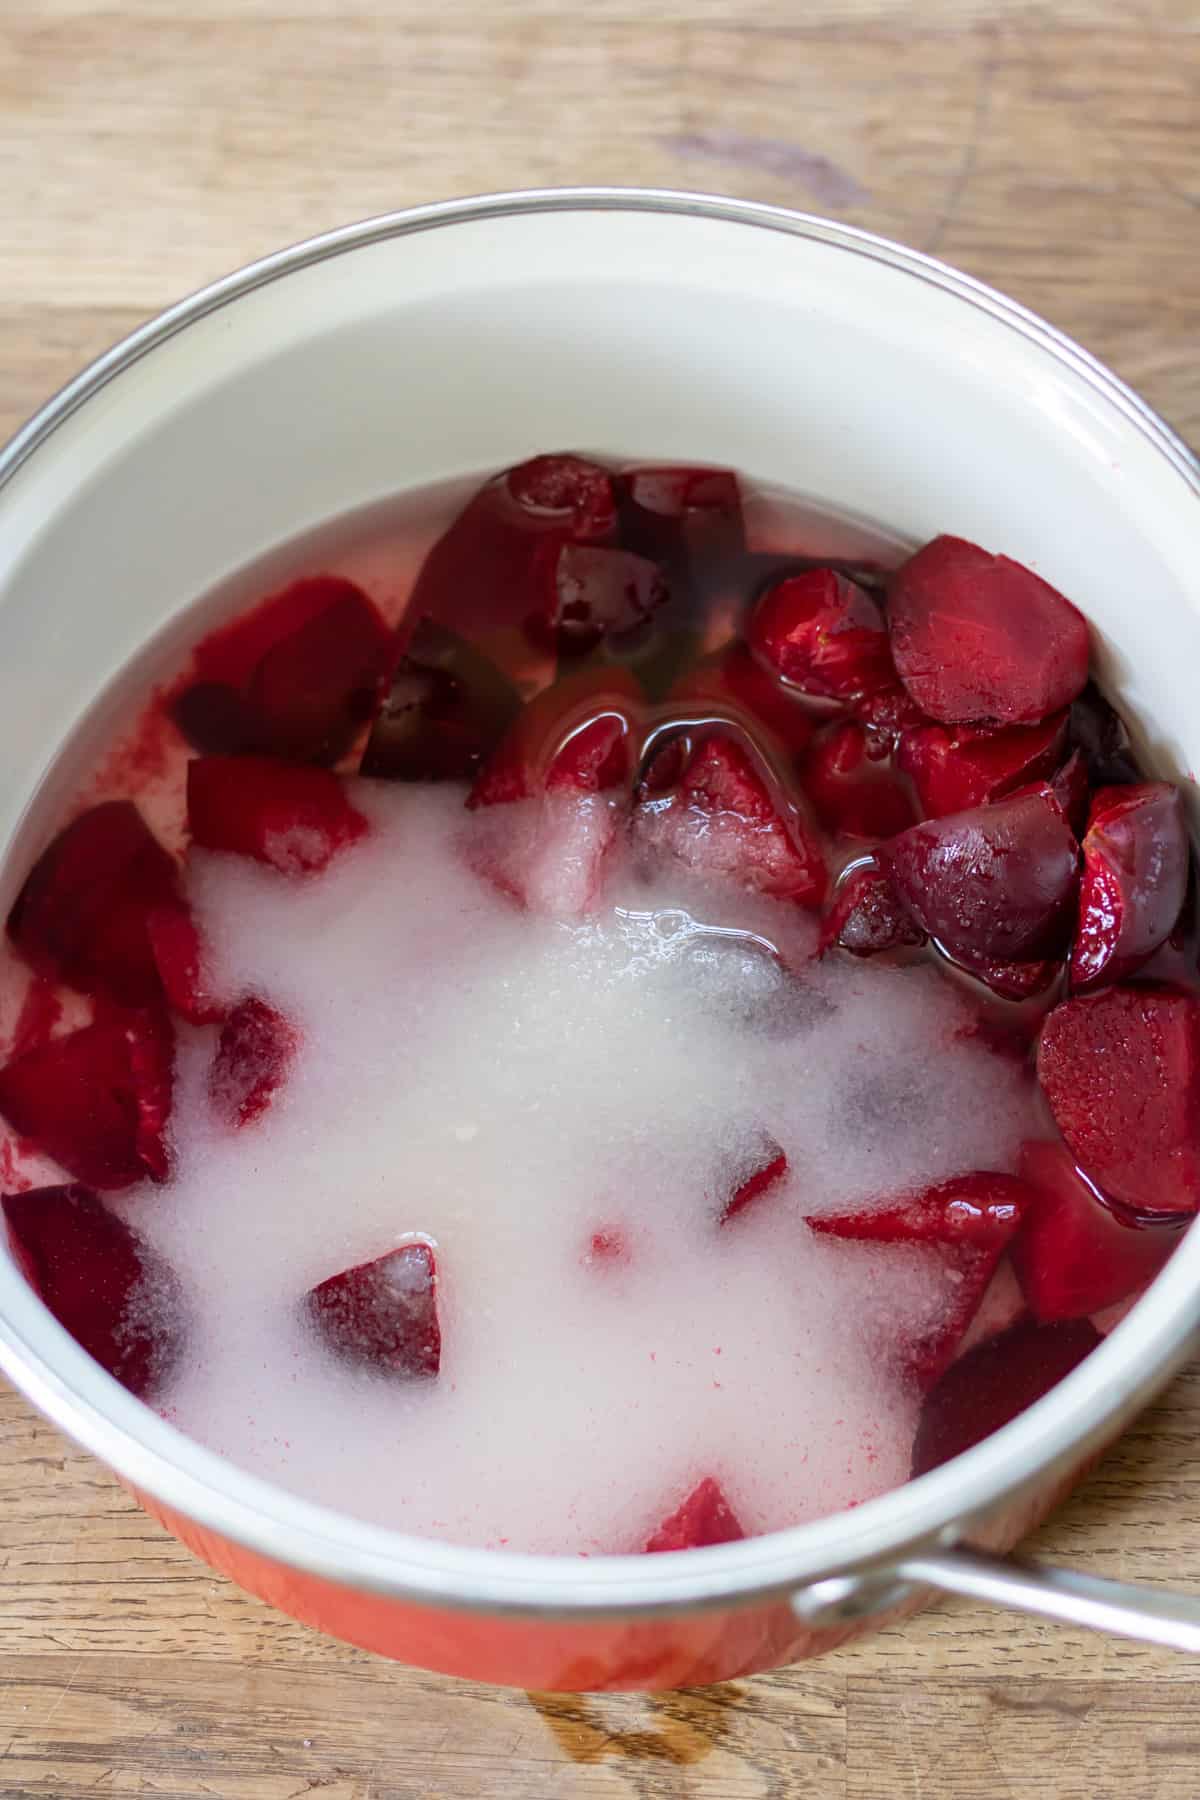 Chopped plums, sugar and water in a pot.